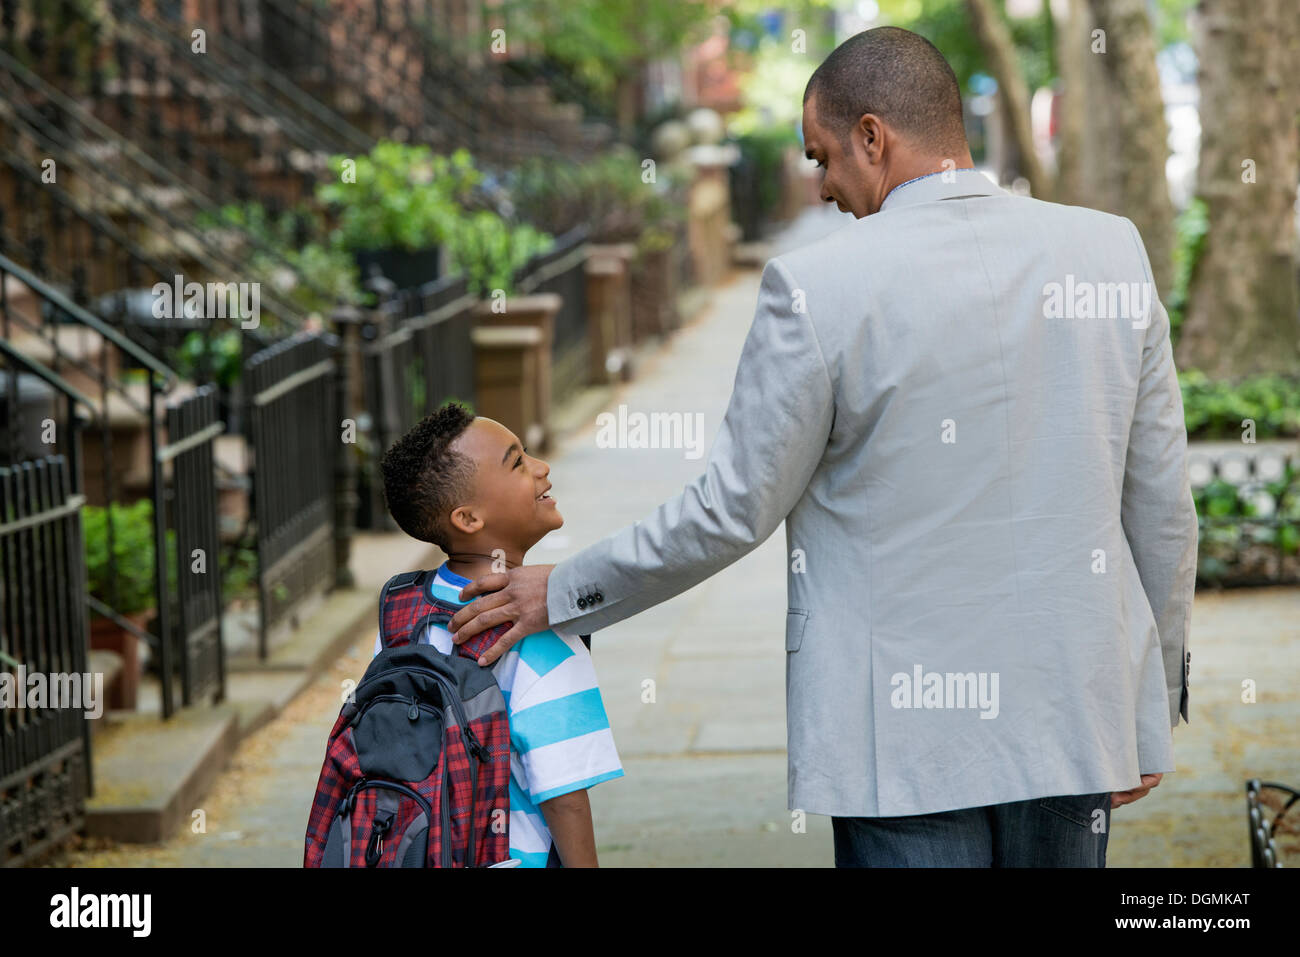 An adult and a child, a father and son, walking together on the street in the city. Stock Photo